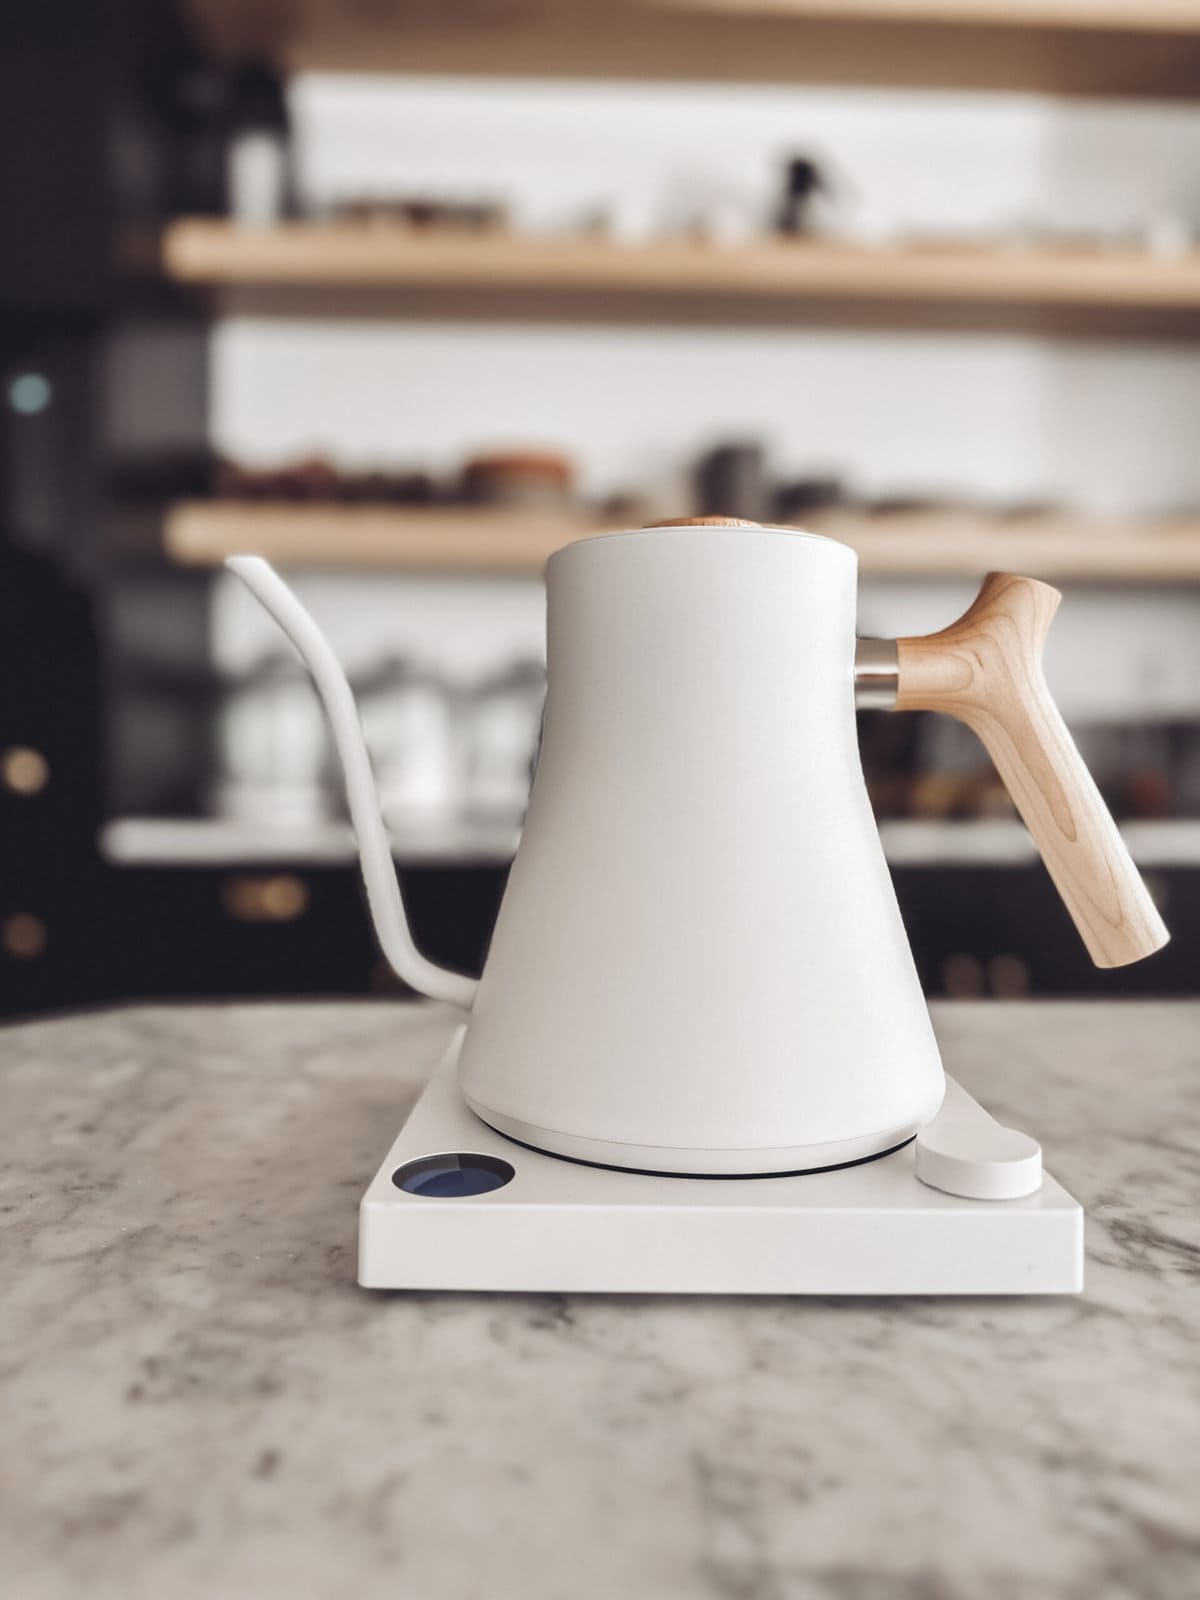 electric kettle 